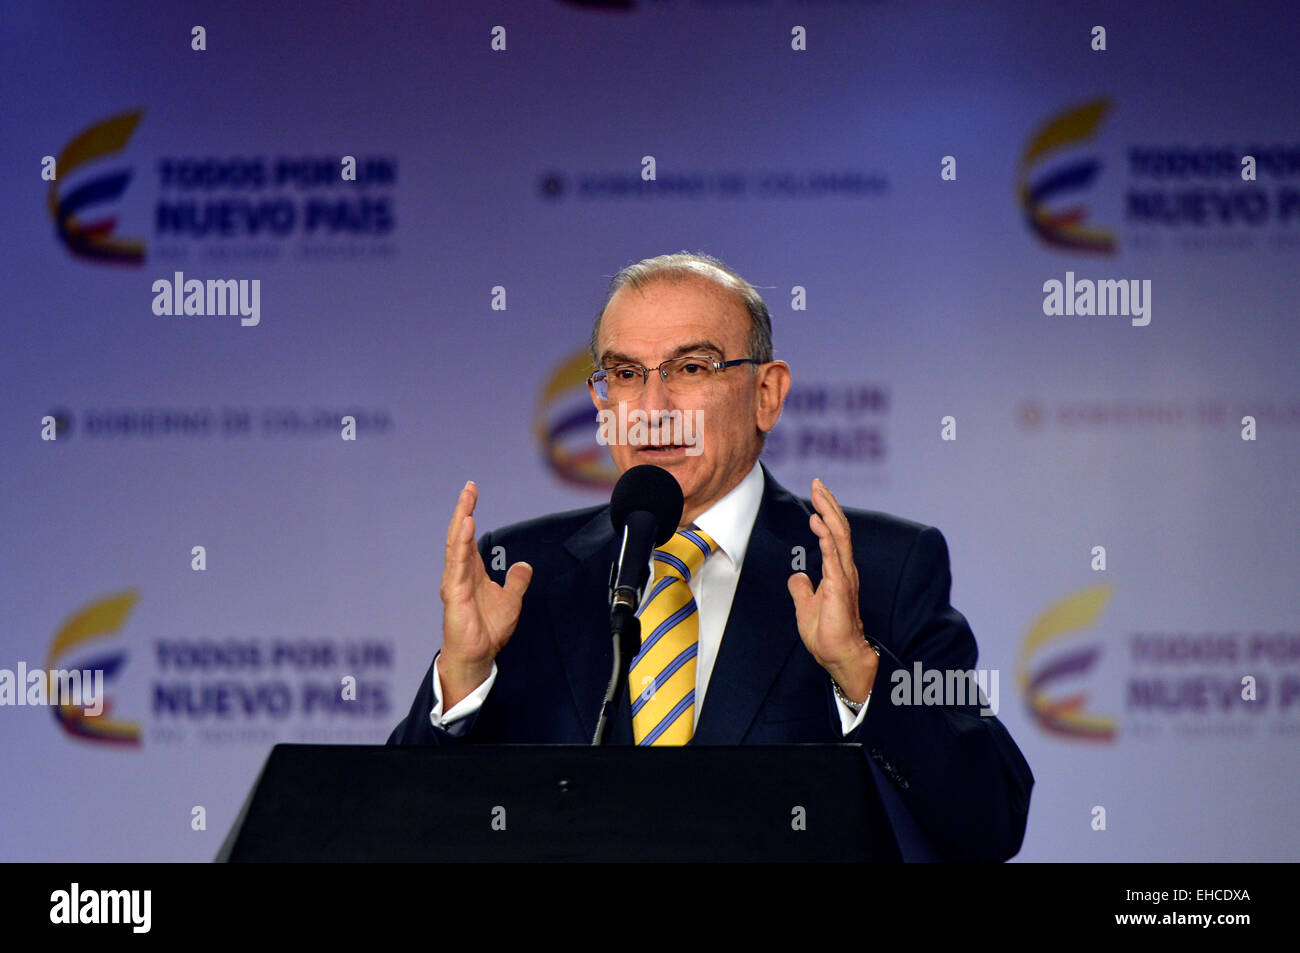 Bogota, Colombia. 11th Mar, 2015. Image provided by Colombia's Presidency shows the chief negotiator of Colombian government in the peace talks with the Colombia's Revolutionary Armed Forces (FARC, for its acronym in Spanish), Humberto de la Calle, delivering a statement at Narino House in Bogota, Colombia, on March 11, 2015. Colombian President Juan Manuel Santos on Tuesday ordered suspension for a month of bombings on camps of FARC rebel group to decelerate the five-decade-long armed conflict in the country. © Efrain Herrera/Colombia's Presidency/Xinhua/Alamy Live News Stock Photo